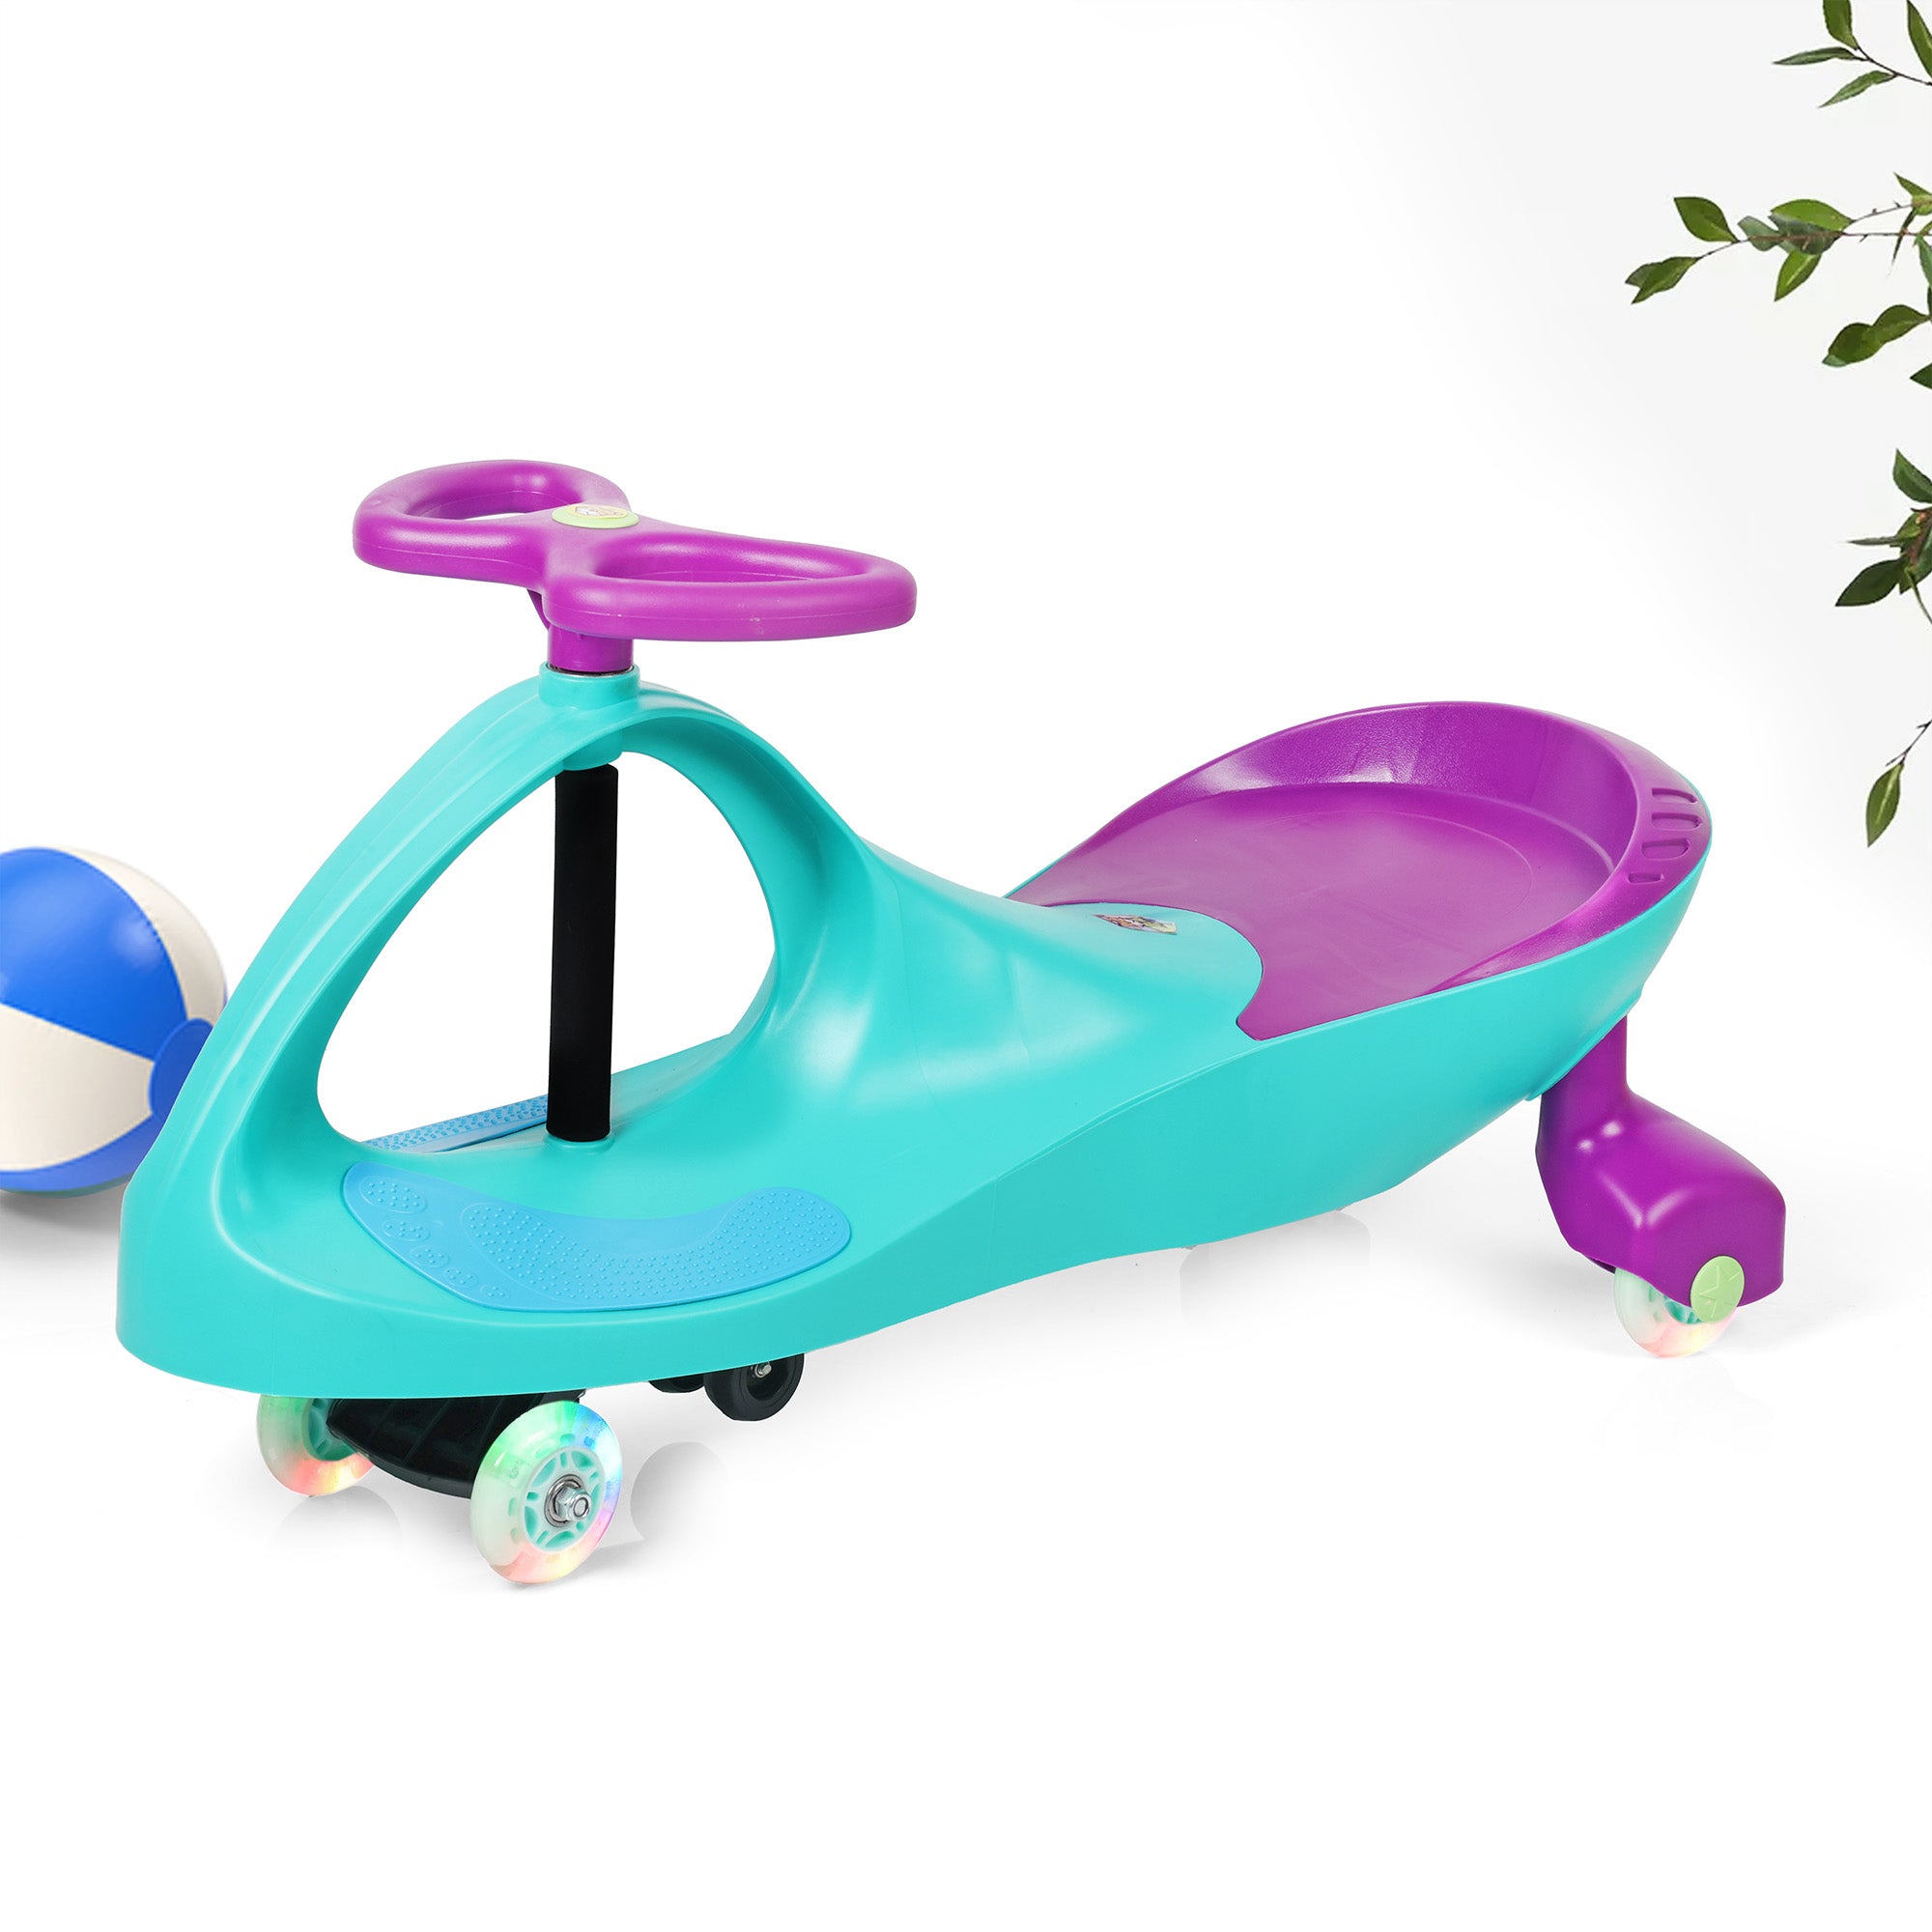 Tygatec Eco Ride-On Swing Car for Kids ( Purple Color)